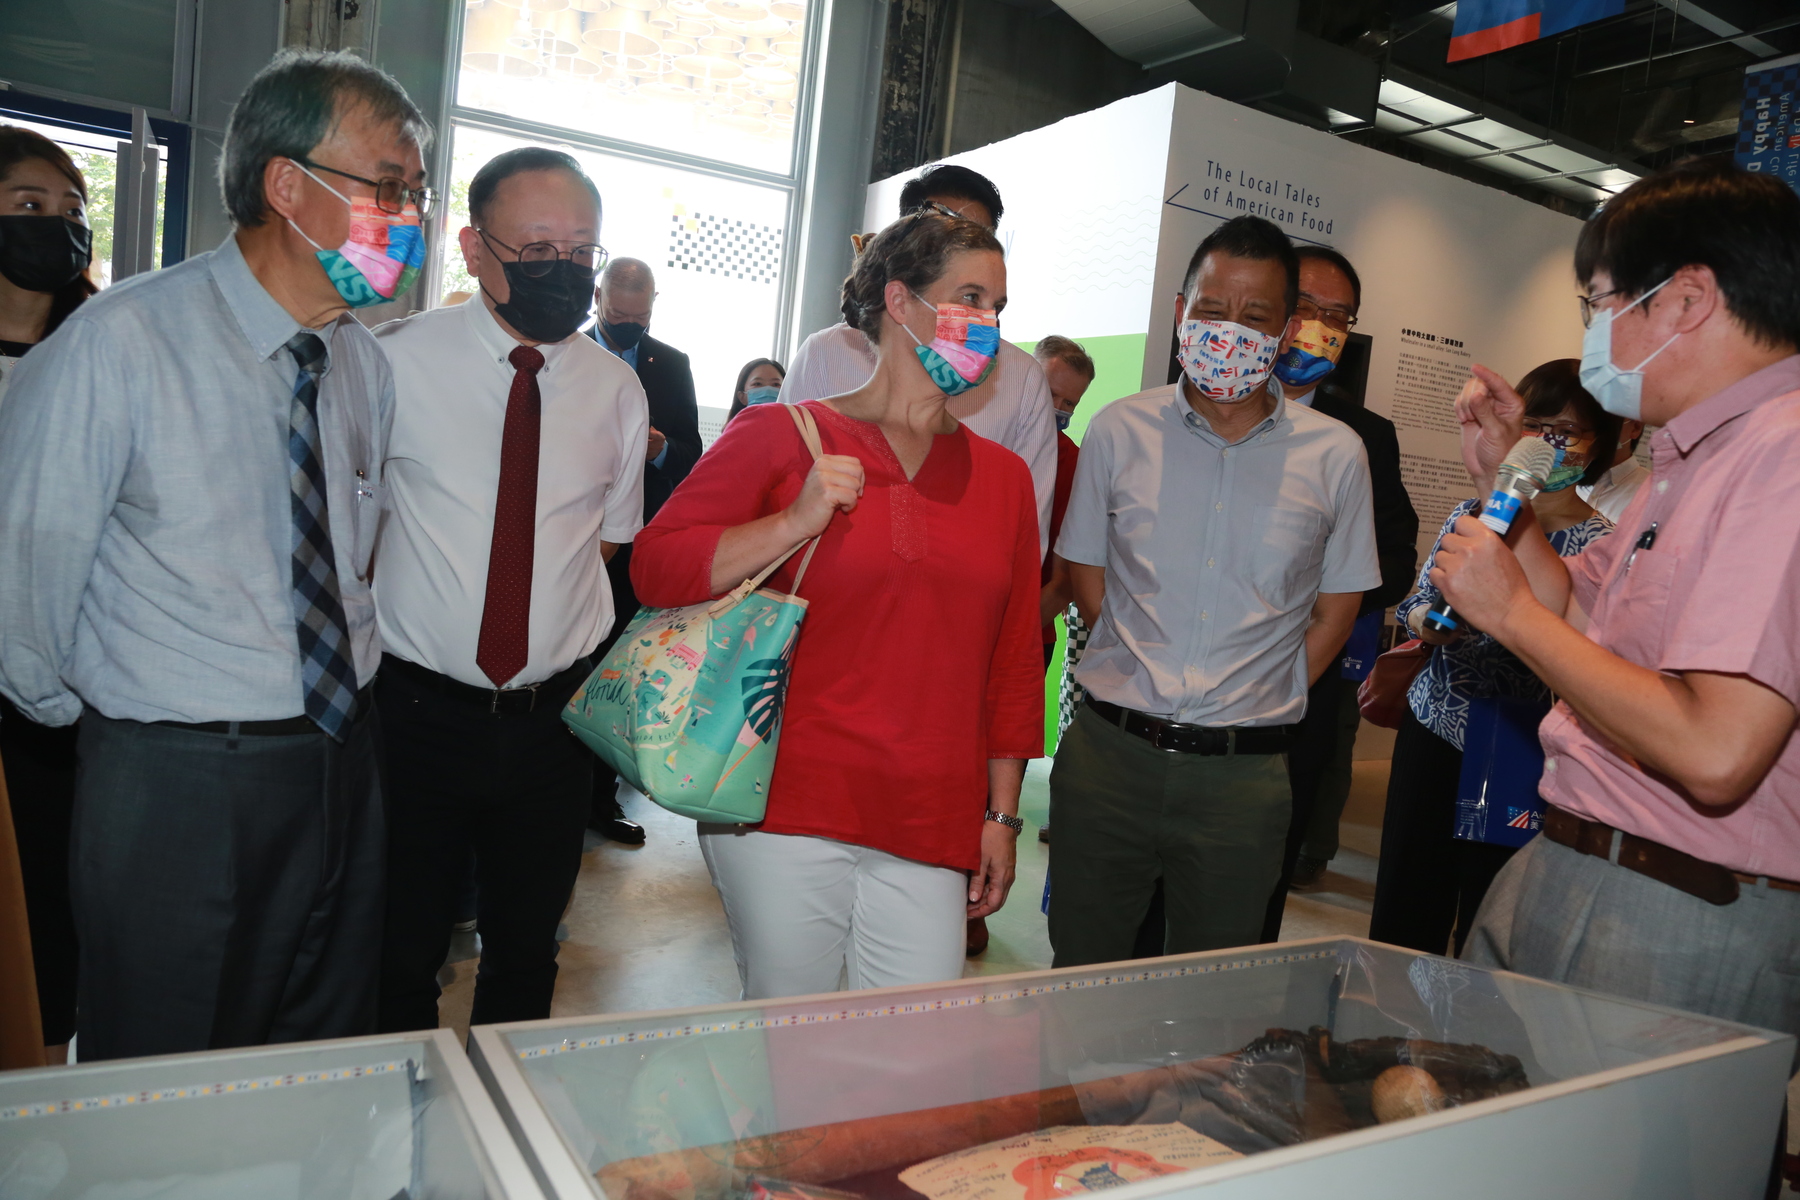 AIT Director Sandra Oudkirk visited NSYSU and the Happy Days Exhibit